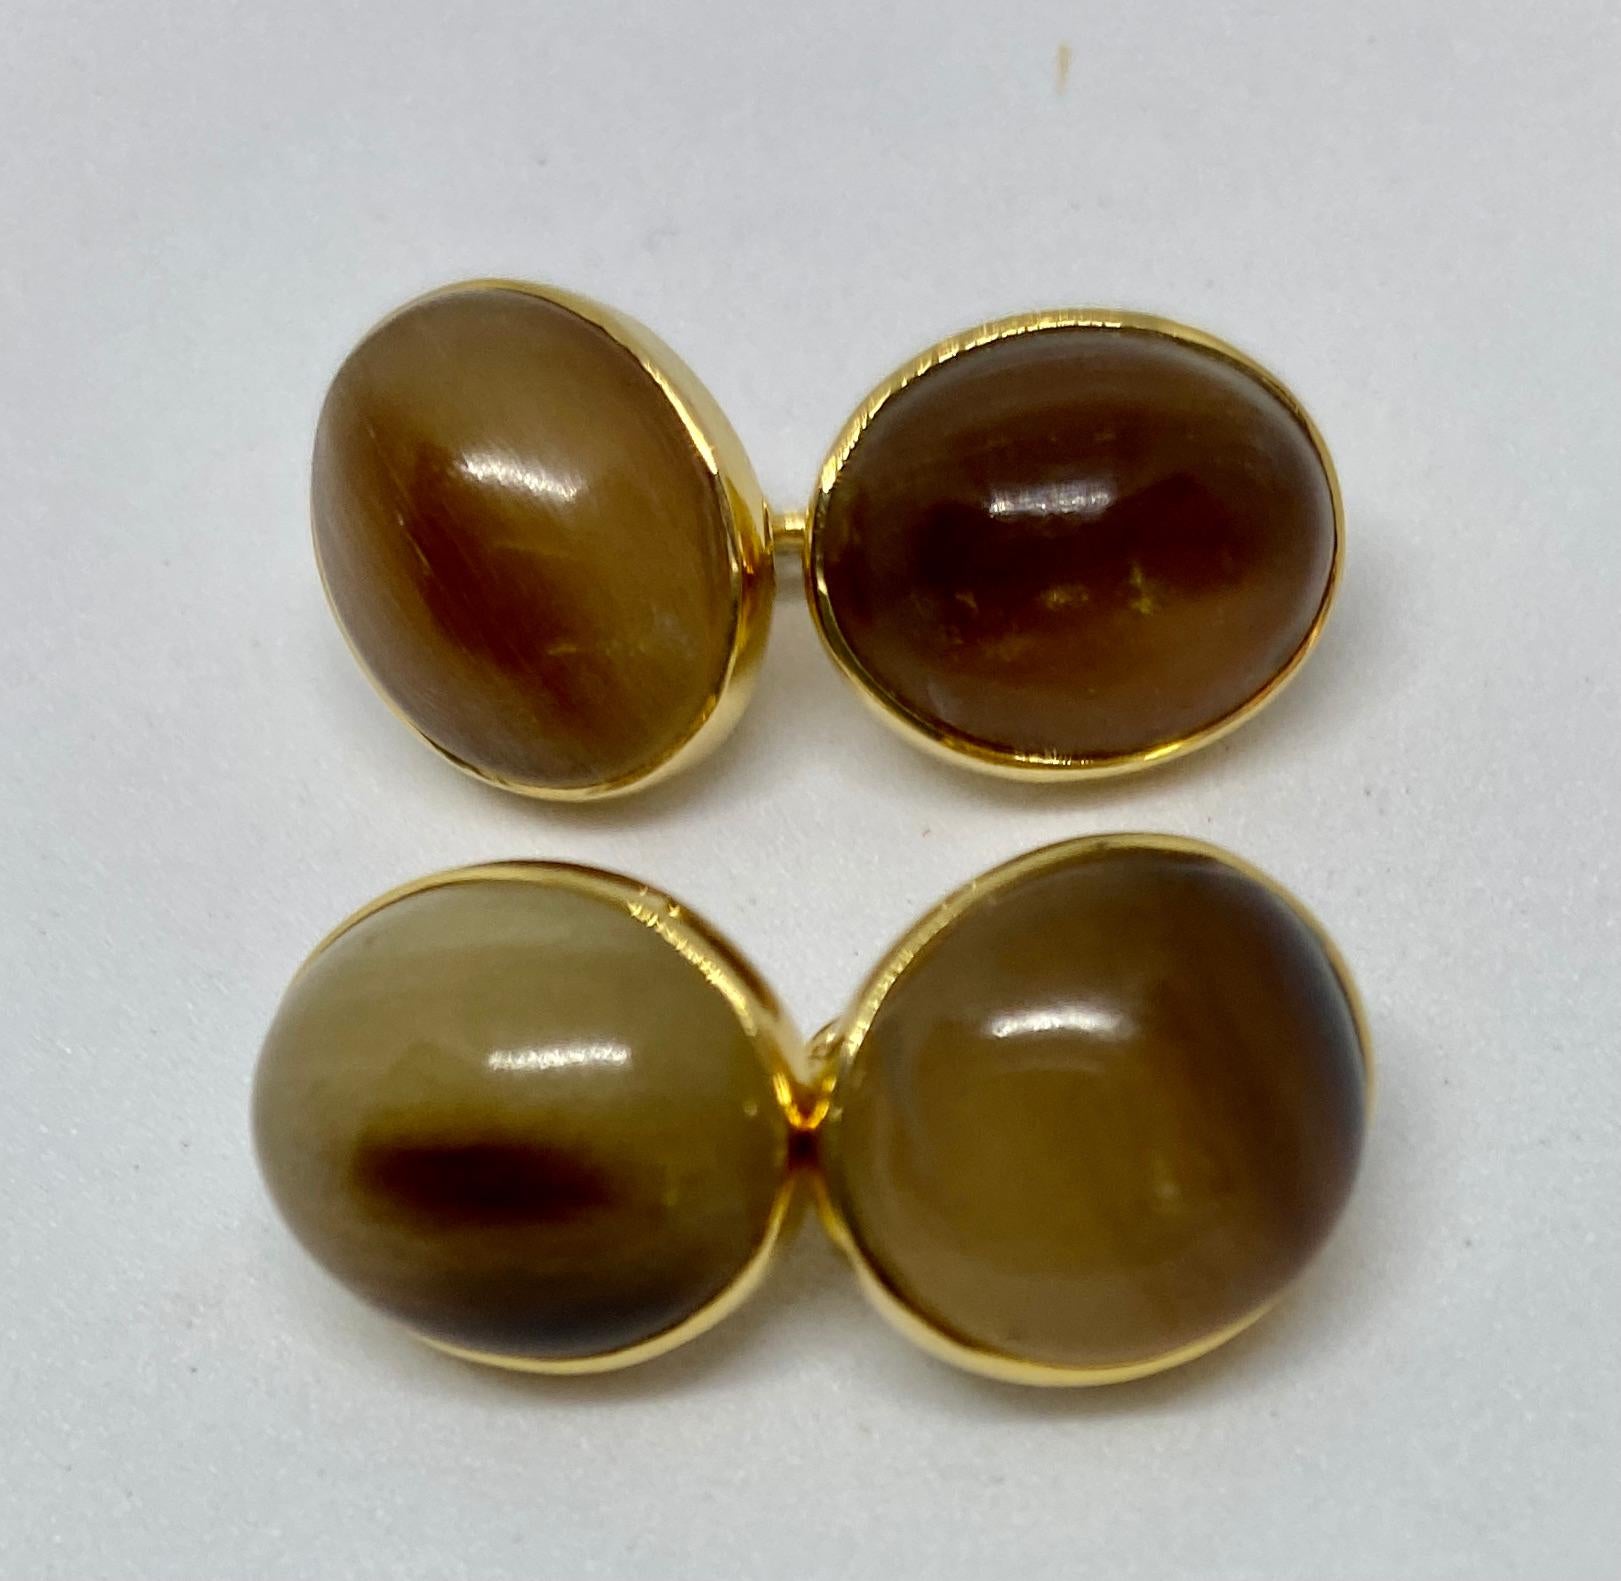 Extremely rare cufflinks featuring four cabochon-cut, agatized (petrified) wood ovals set in 18K yellow gold by Trianon.

The four ovals each measure 12.5 by 10.8mm and are linked to their mates by solid gold chains. They show various browns, tans